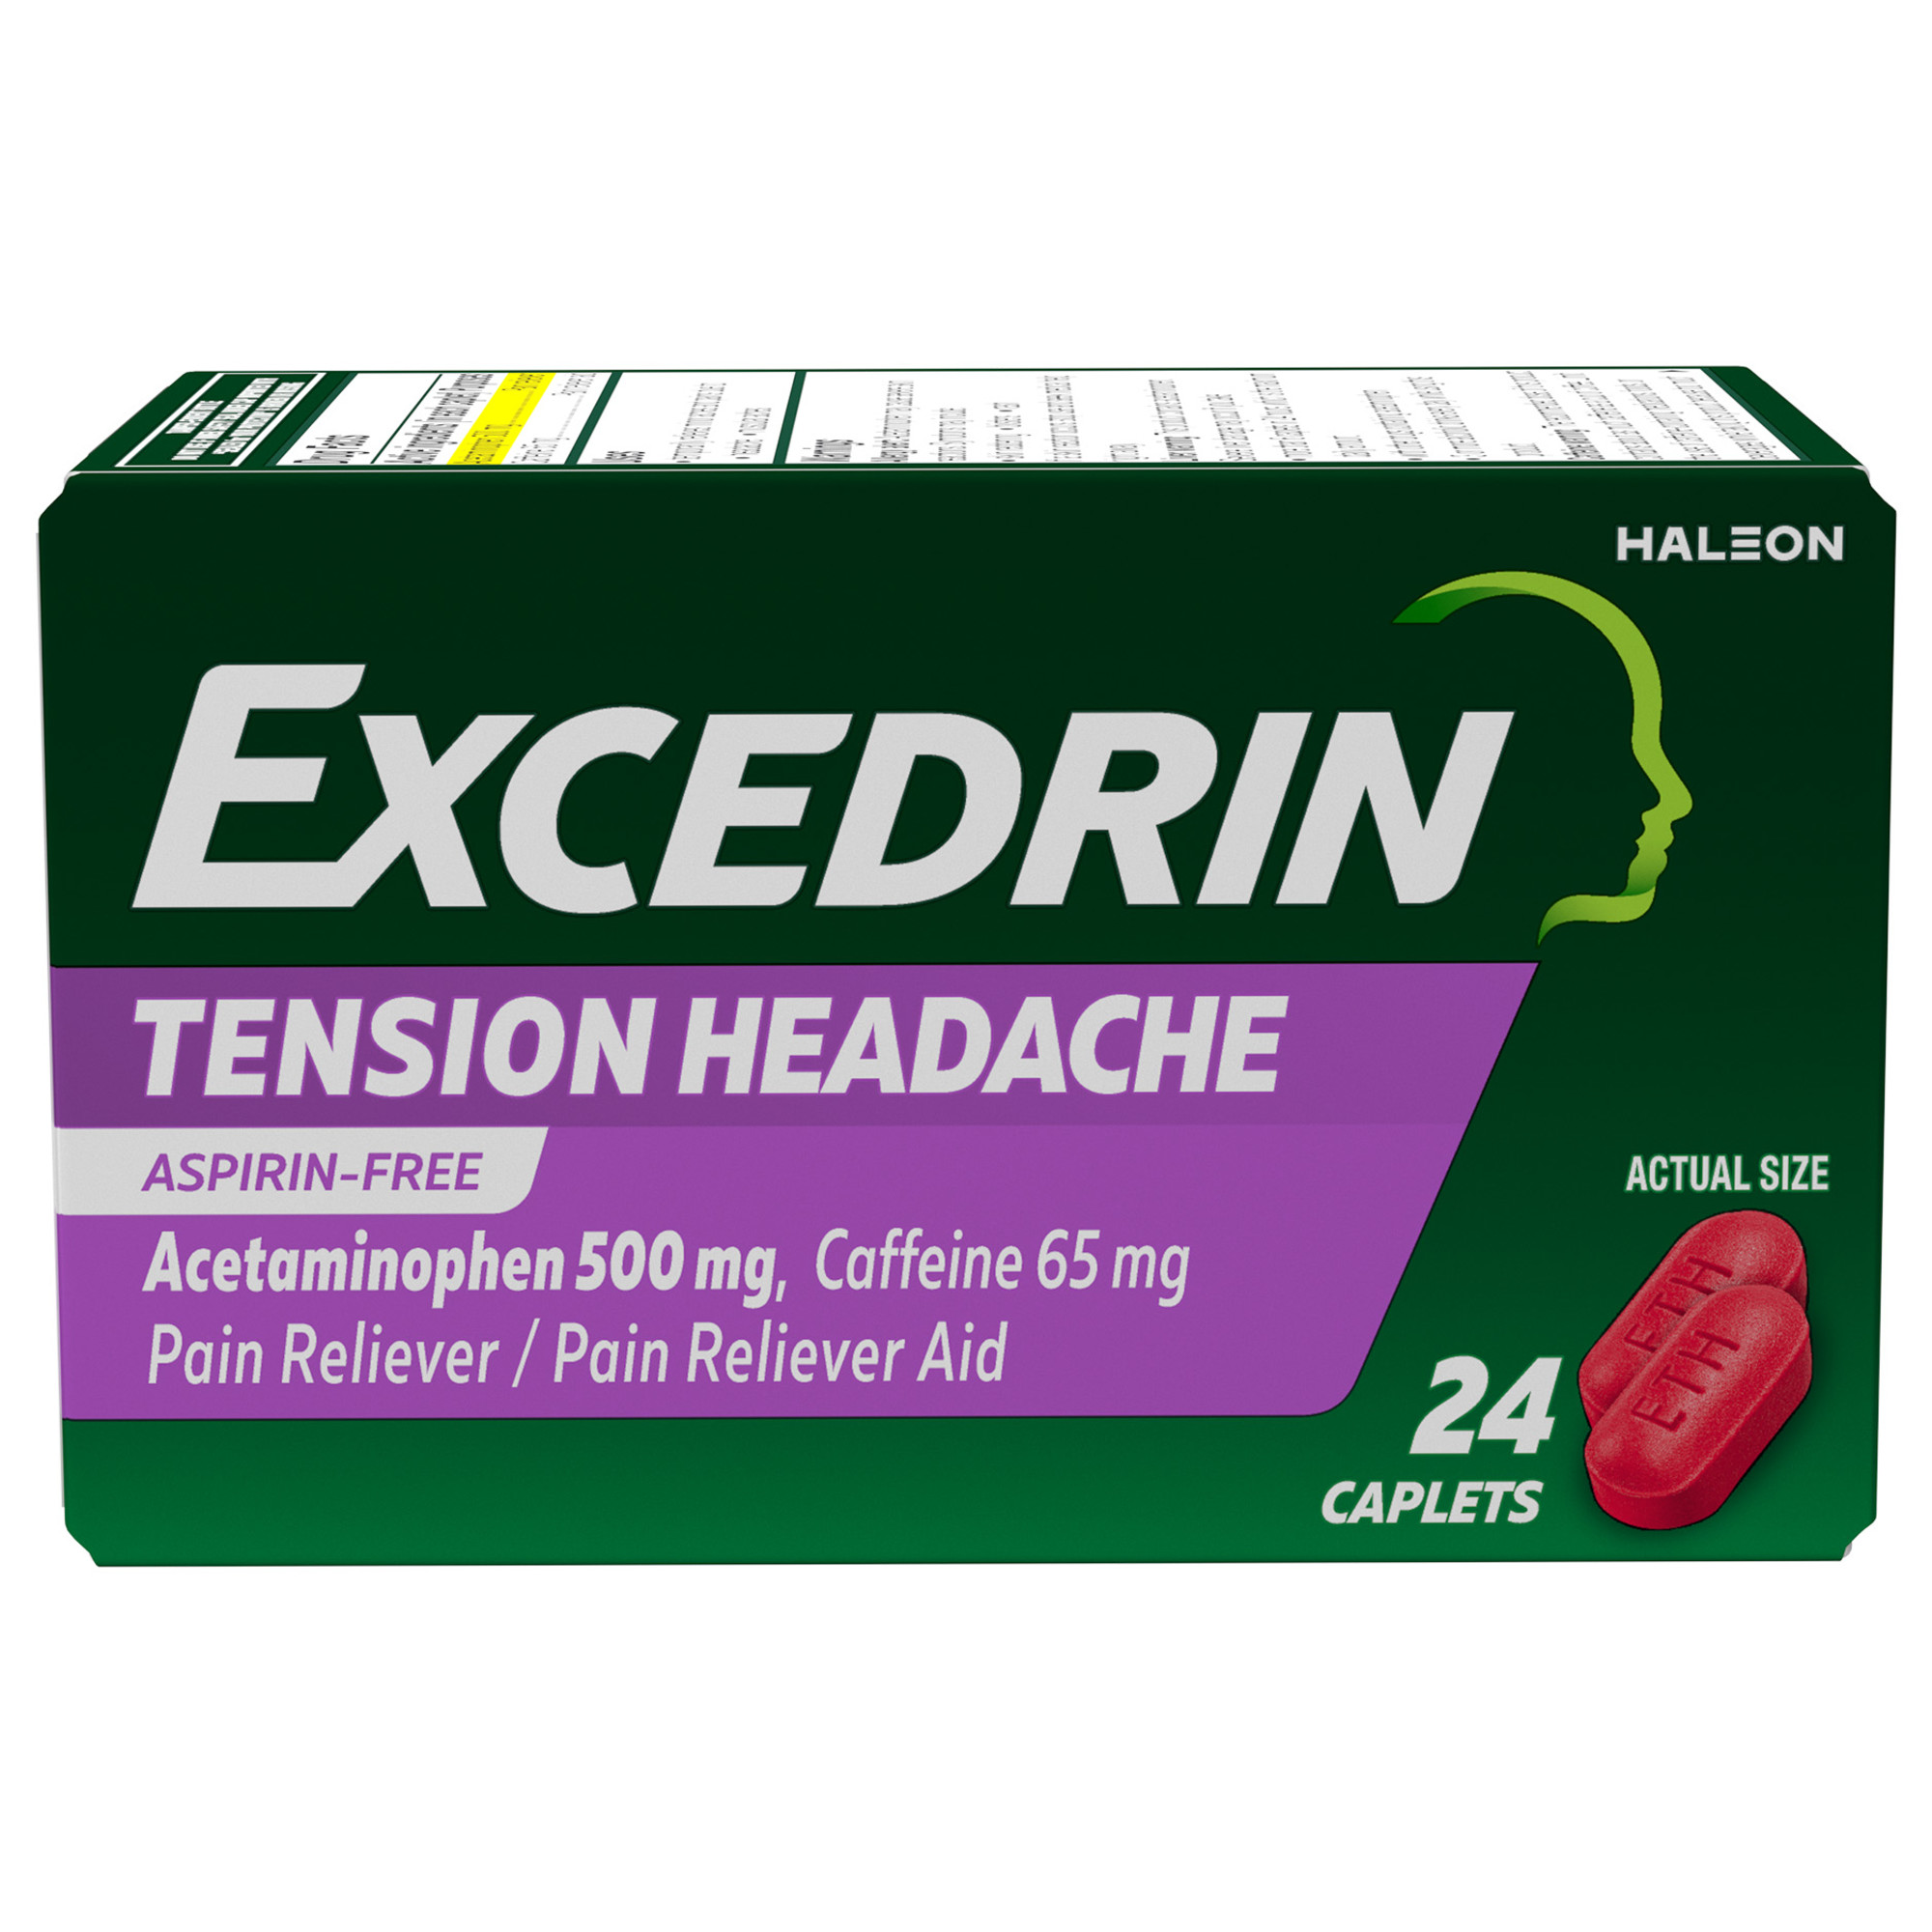 Excedrin Tension Headache Relief Acetaminophen and Caffeine Caplets, 24 Count - image 1 of 10